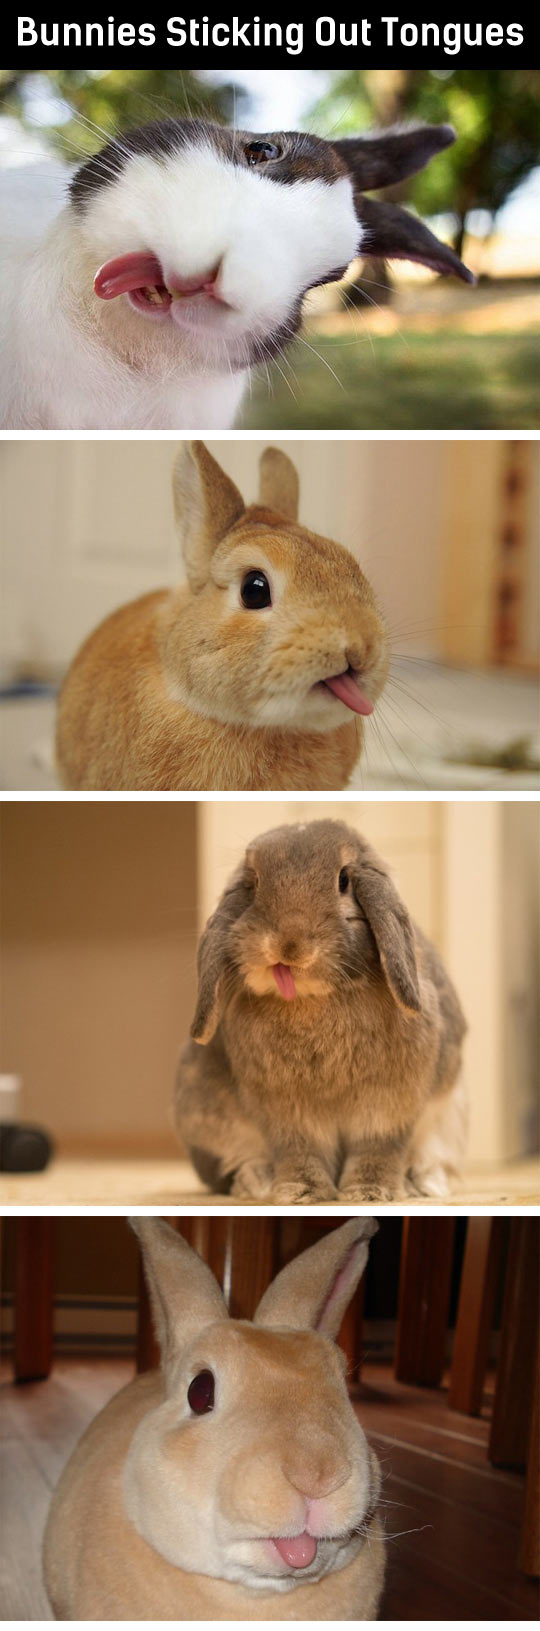 Bunnies sticking out their tongues.